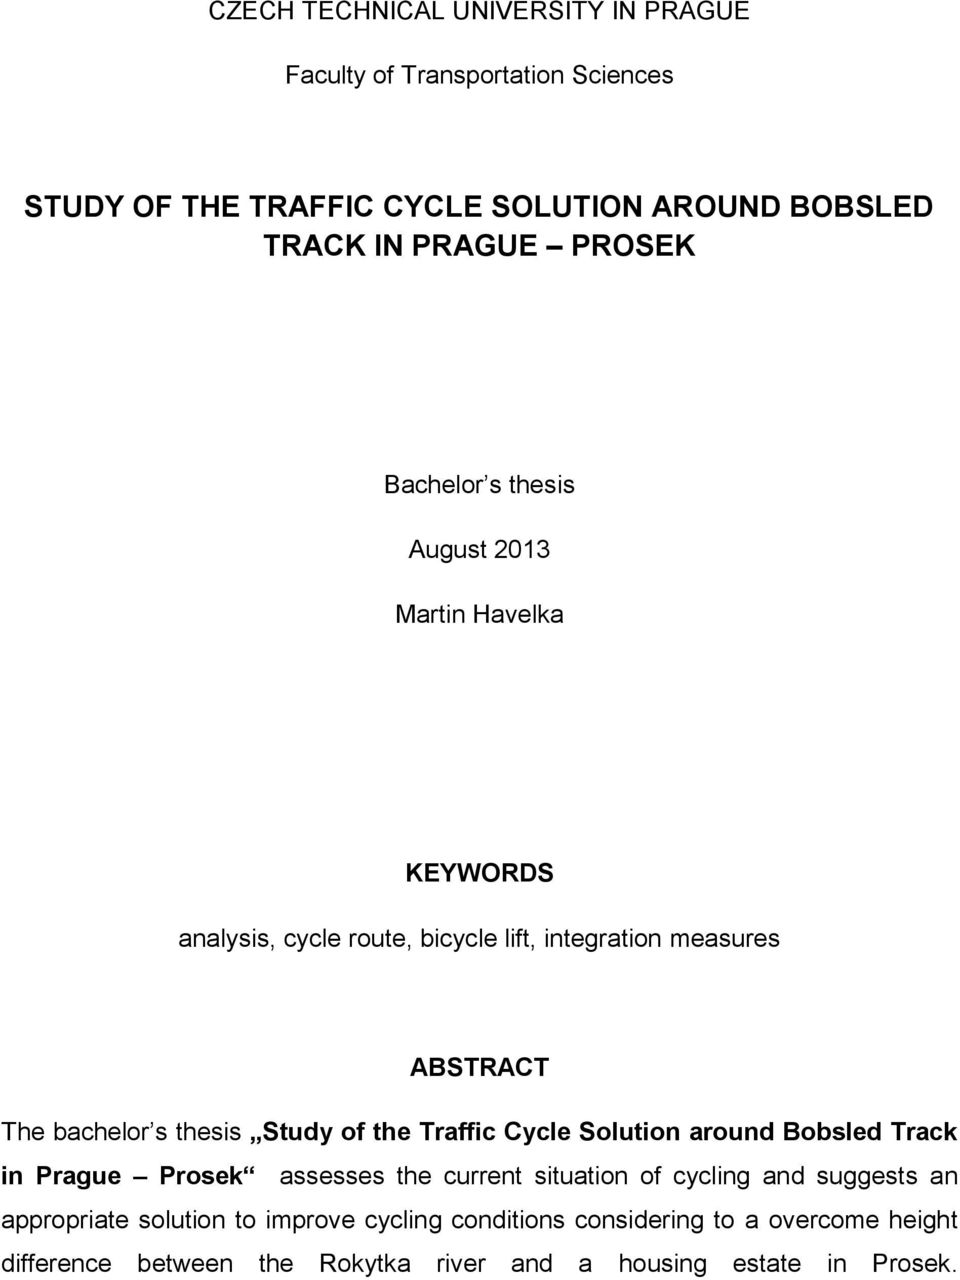 thesis Study of the Traffic Cycle Solution around Bobsled Track in Prague Prosek assesses the current situation of cycling and suggests an